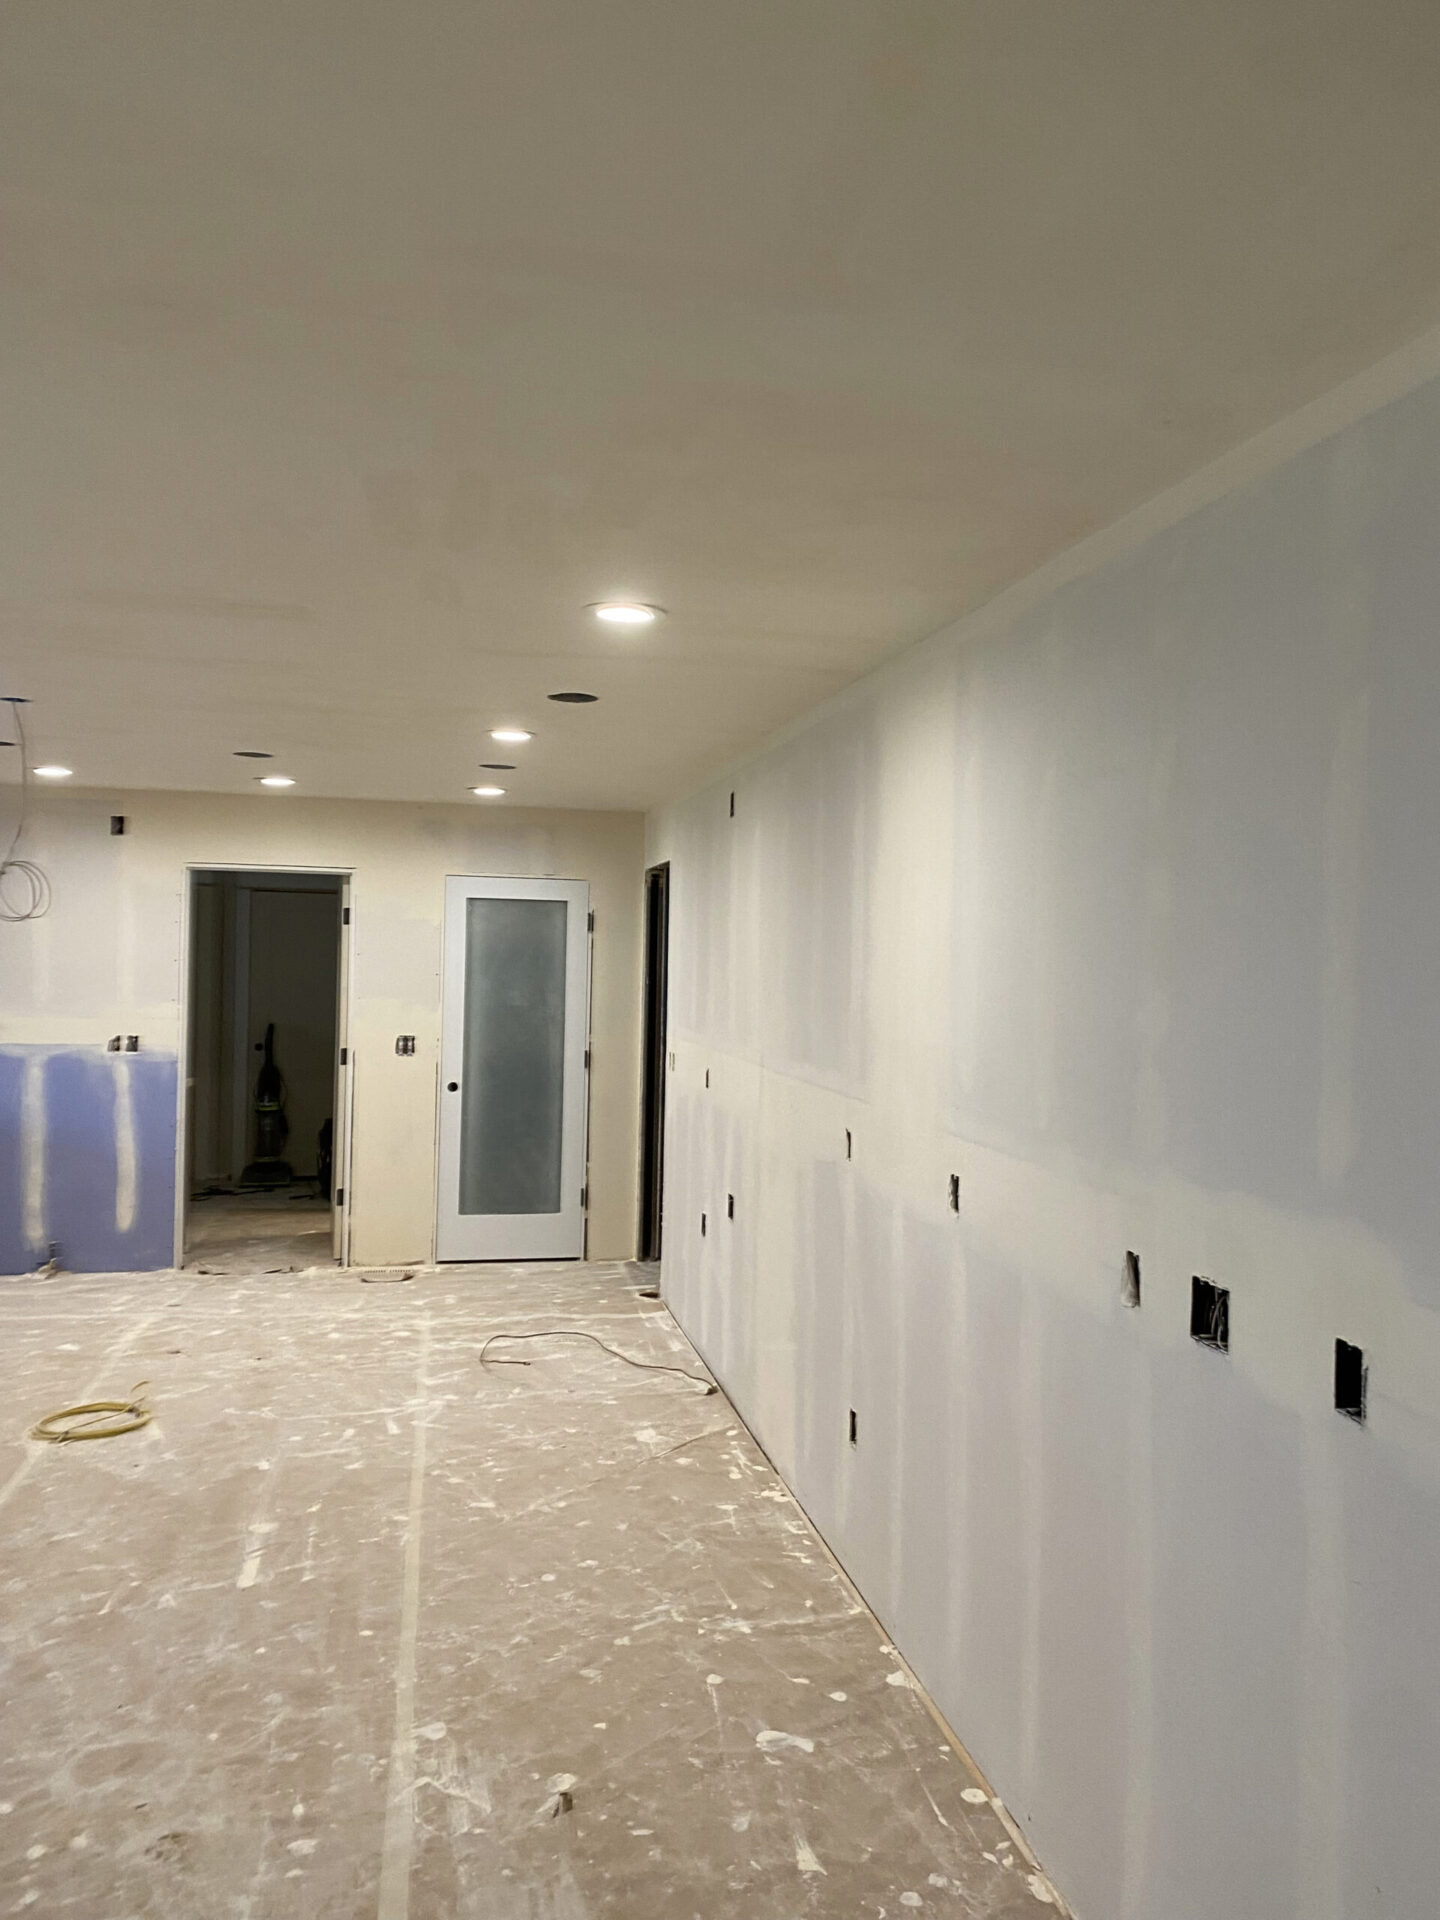 Forest Grove Residential Drywall 2